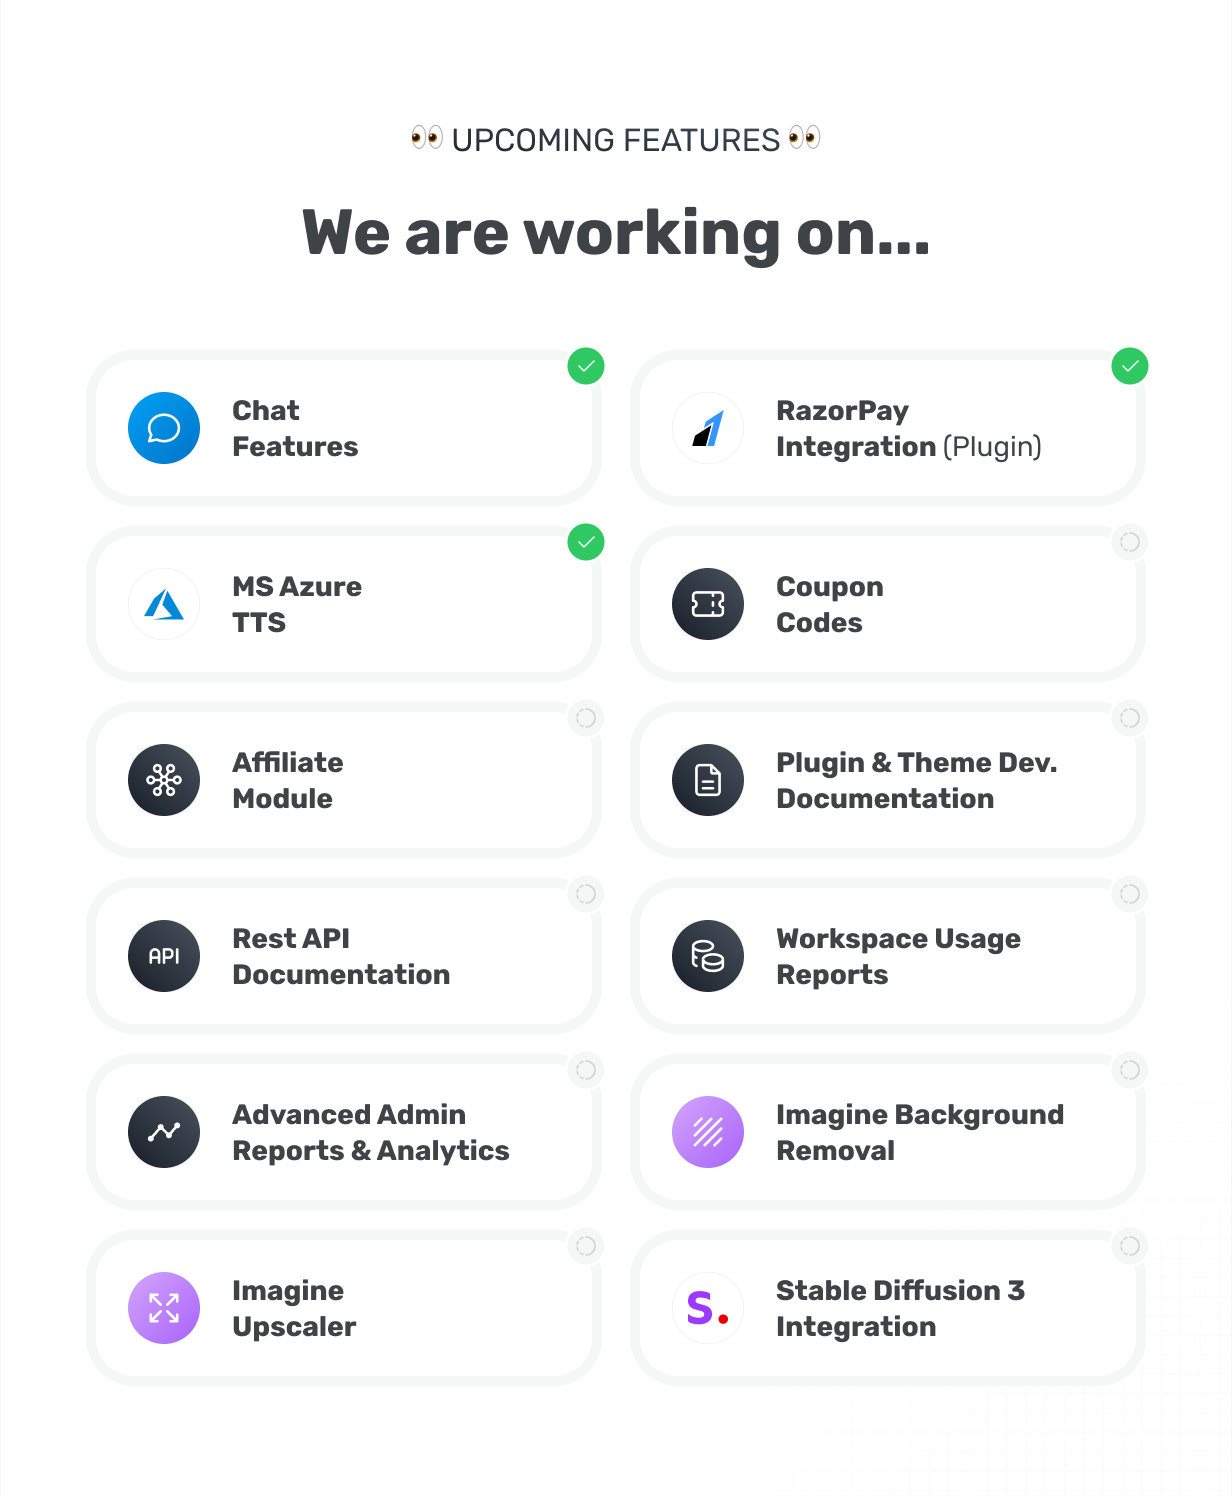 Upcoming Features We're working on... RazorPay, Coupon Codes, Affiliate Module, Chat Features, Rest API Documentation, Plugin & Theme Development Documentation, Advanced Admin Reports & Analytics, Workspace Usage Reports, Imagine Upscaler, Imagine Remove Background, Microsoft Azure TTS, Stable Diffusion 3 Integration @heyaikeedo #aikeedo